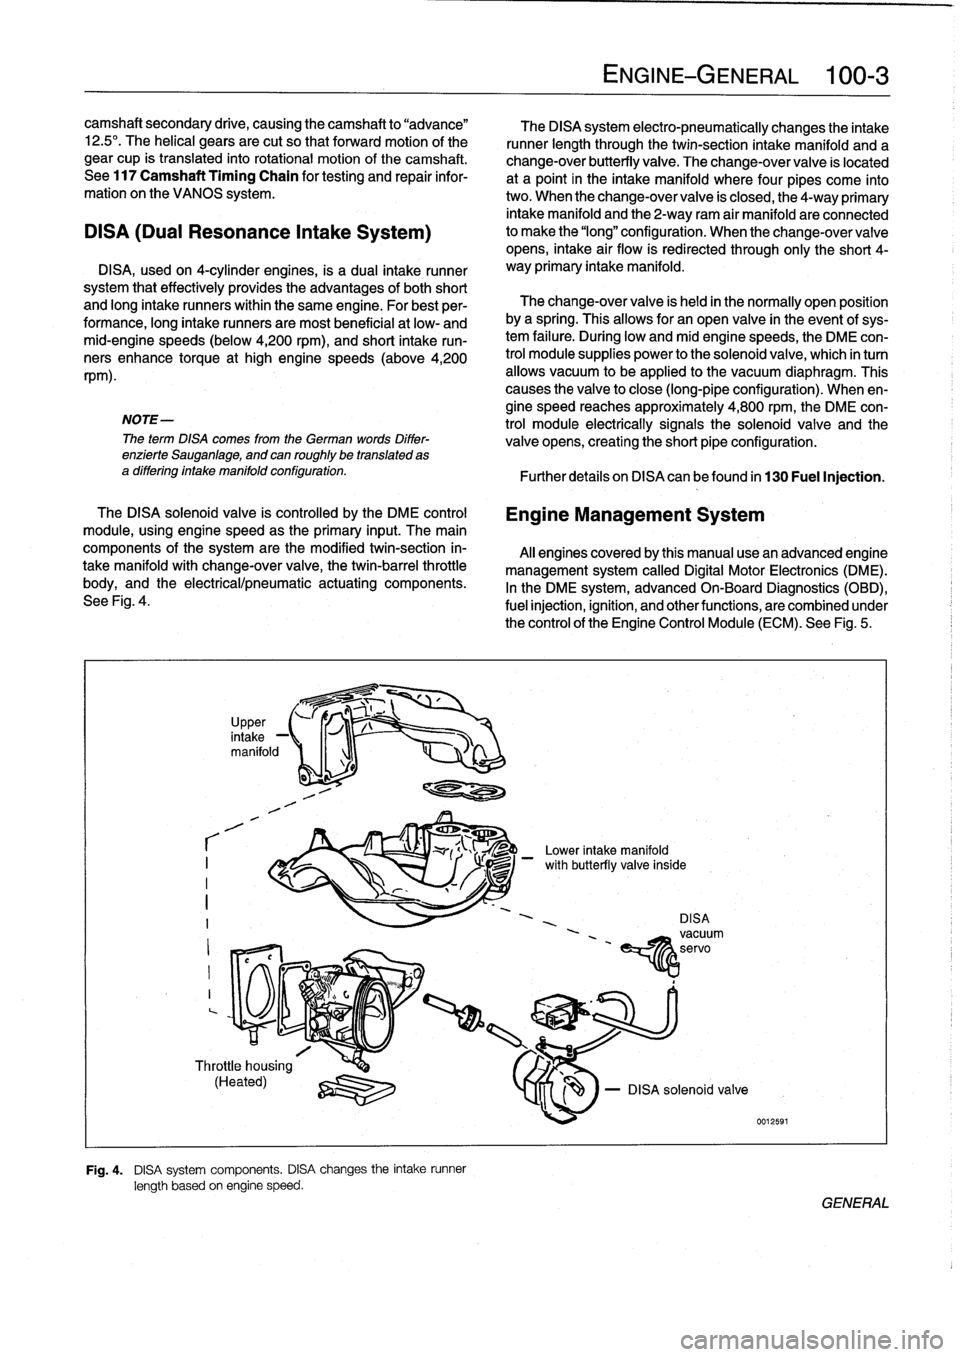 BMW M3 1993 E36 Workshop Manual camshaft
secondary
drive,
causing
thecamshaft
to
"advance"

12
.5°
.
The
helical
gears
are
cut
so
that
forward
motion
of
the

gear
cup
is
transiated
into
rotational
motion
of
the
camshaft
.

See
117
